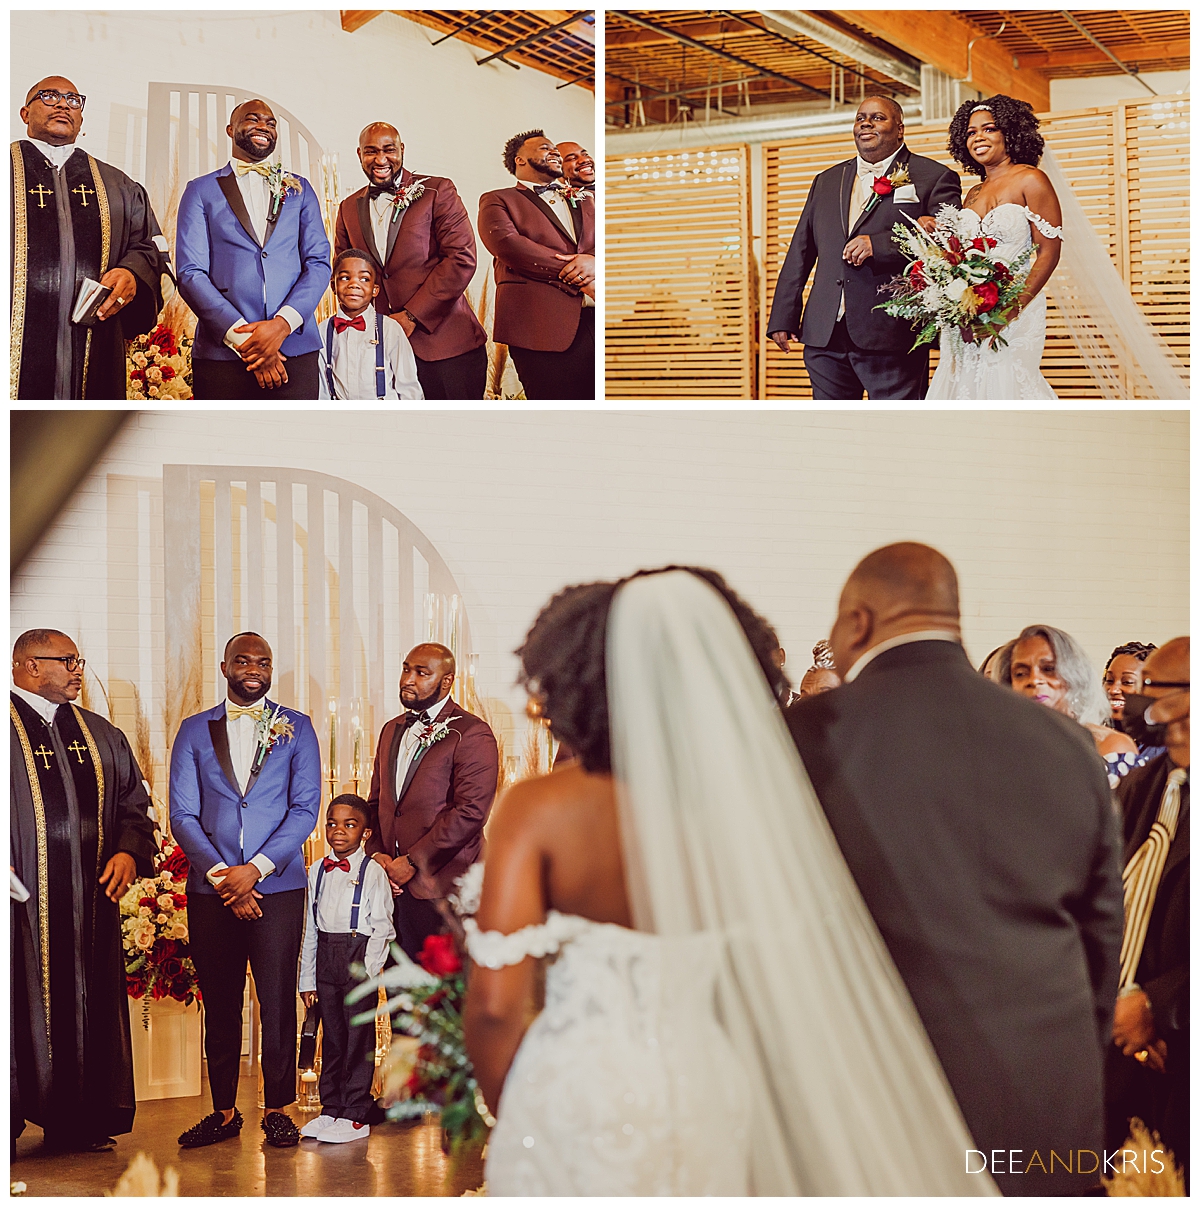 Three images: Top left image of Groom with groomsmen smiling. Top right image of Father and bride starting processional. Bottom image of groom watching bride walk toward him down the aisle.